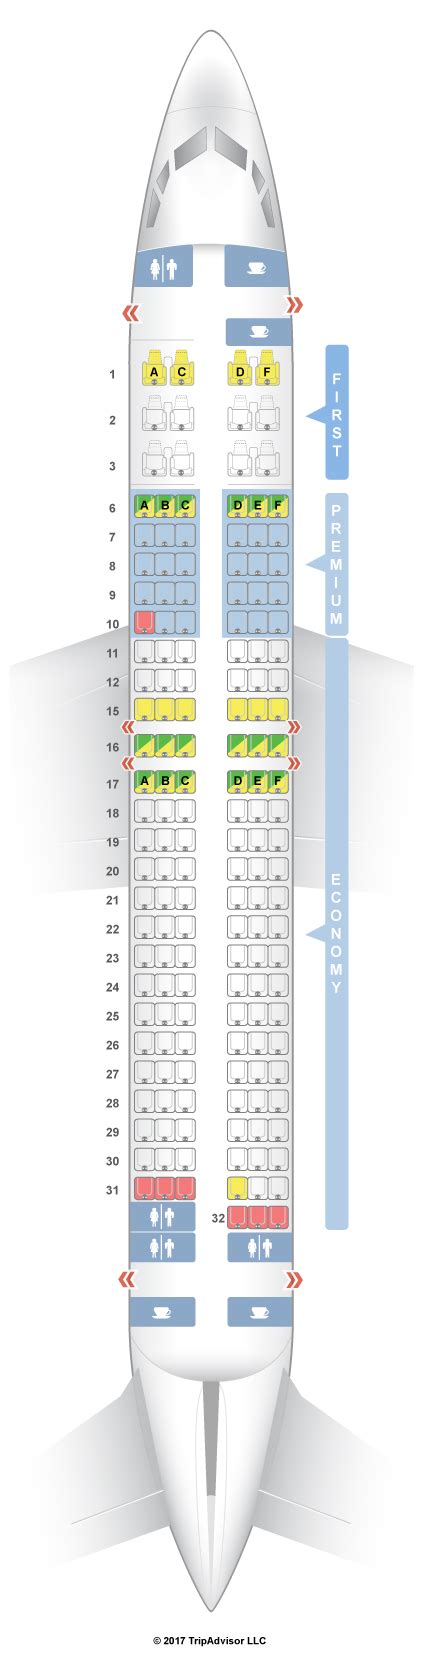 Alaska airlines seating chart. Purple-ish mood lighting gave the cabin a relaxing futuristic feel, unlike anything I'd seen on other Max jets that use the dynamic lighting system. Flying on an Alaska Airlines Boeing 737 Max 9 ... 